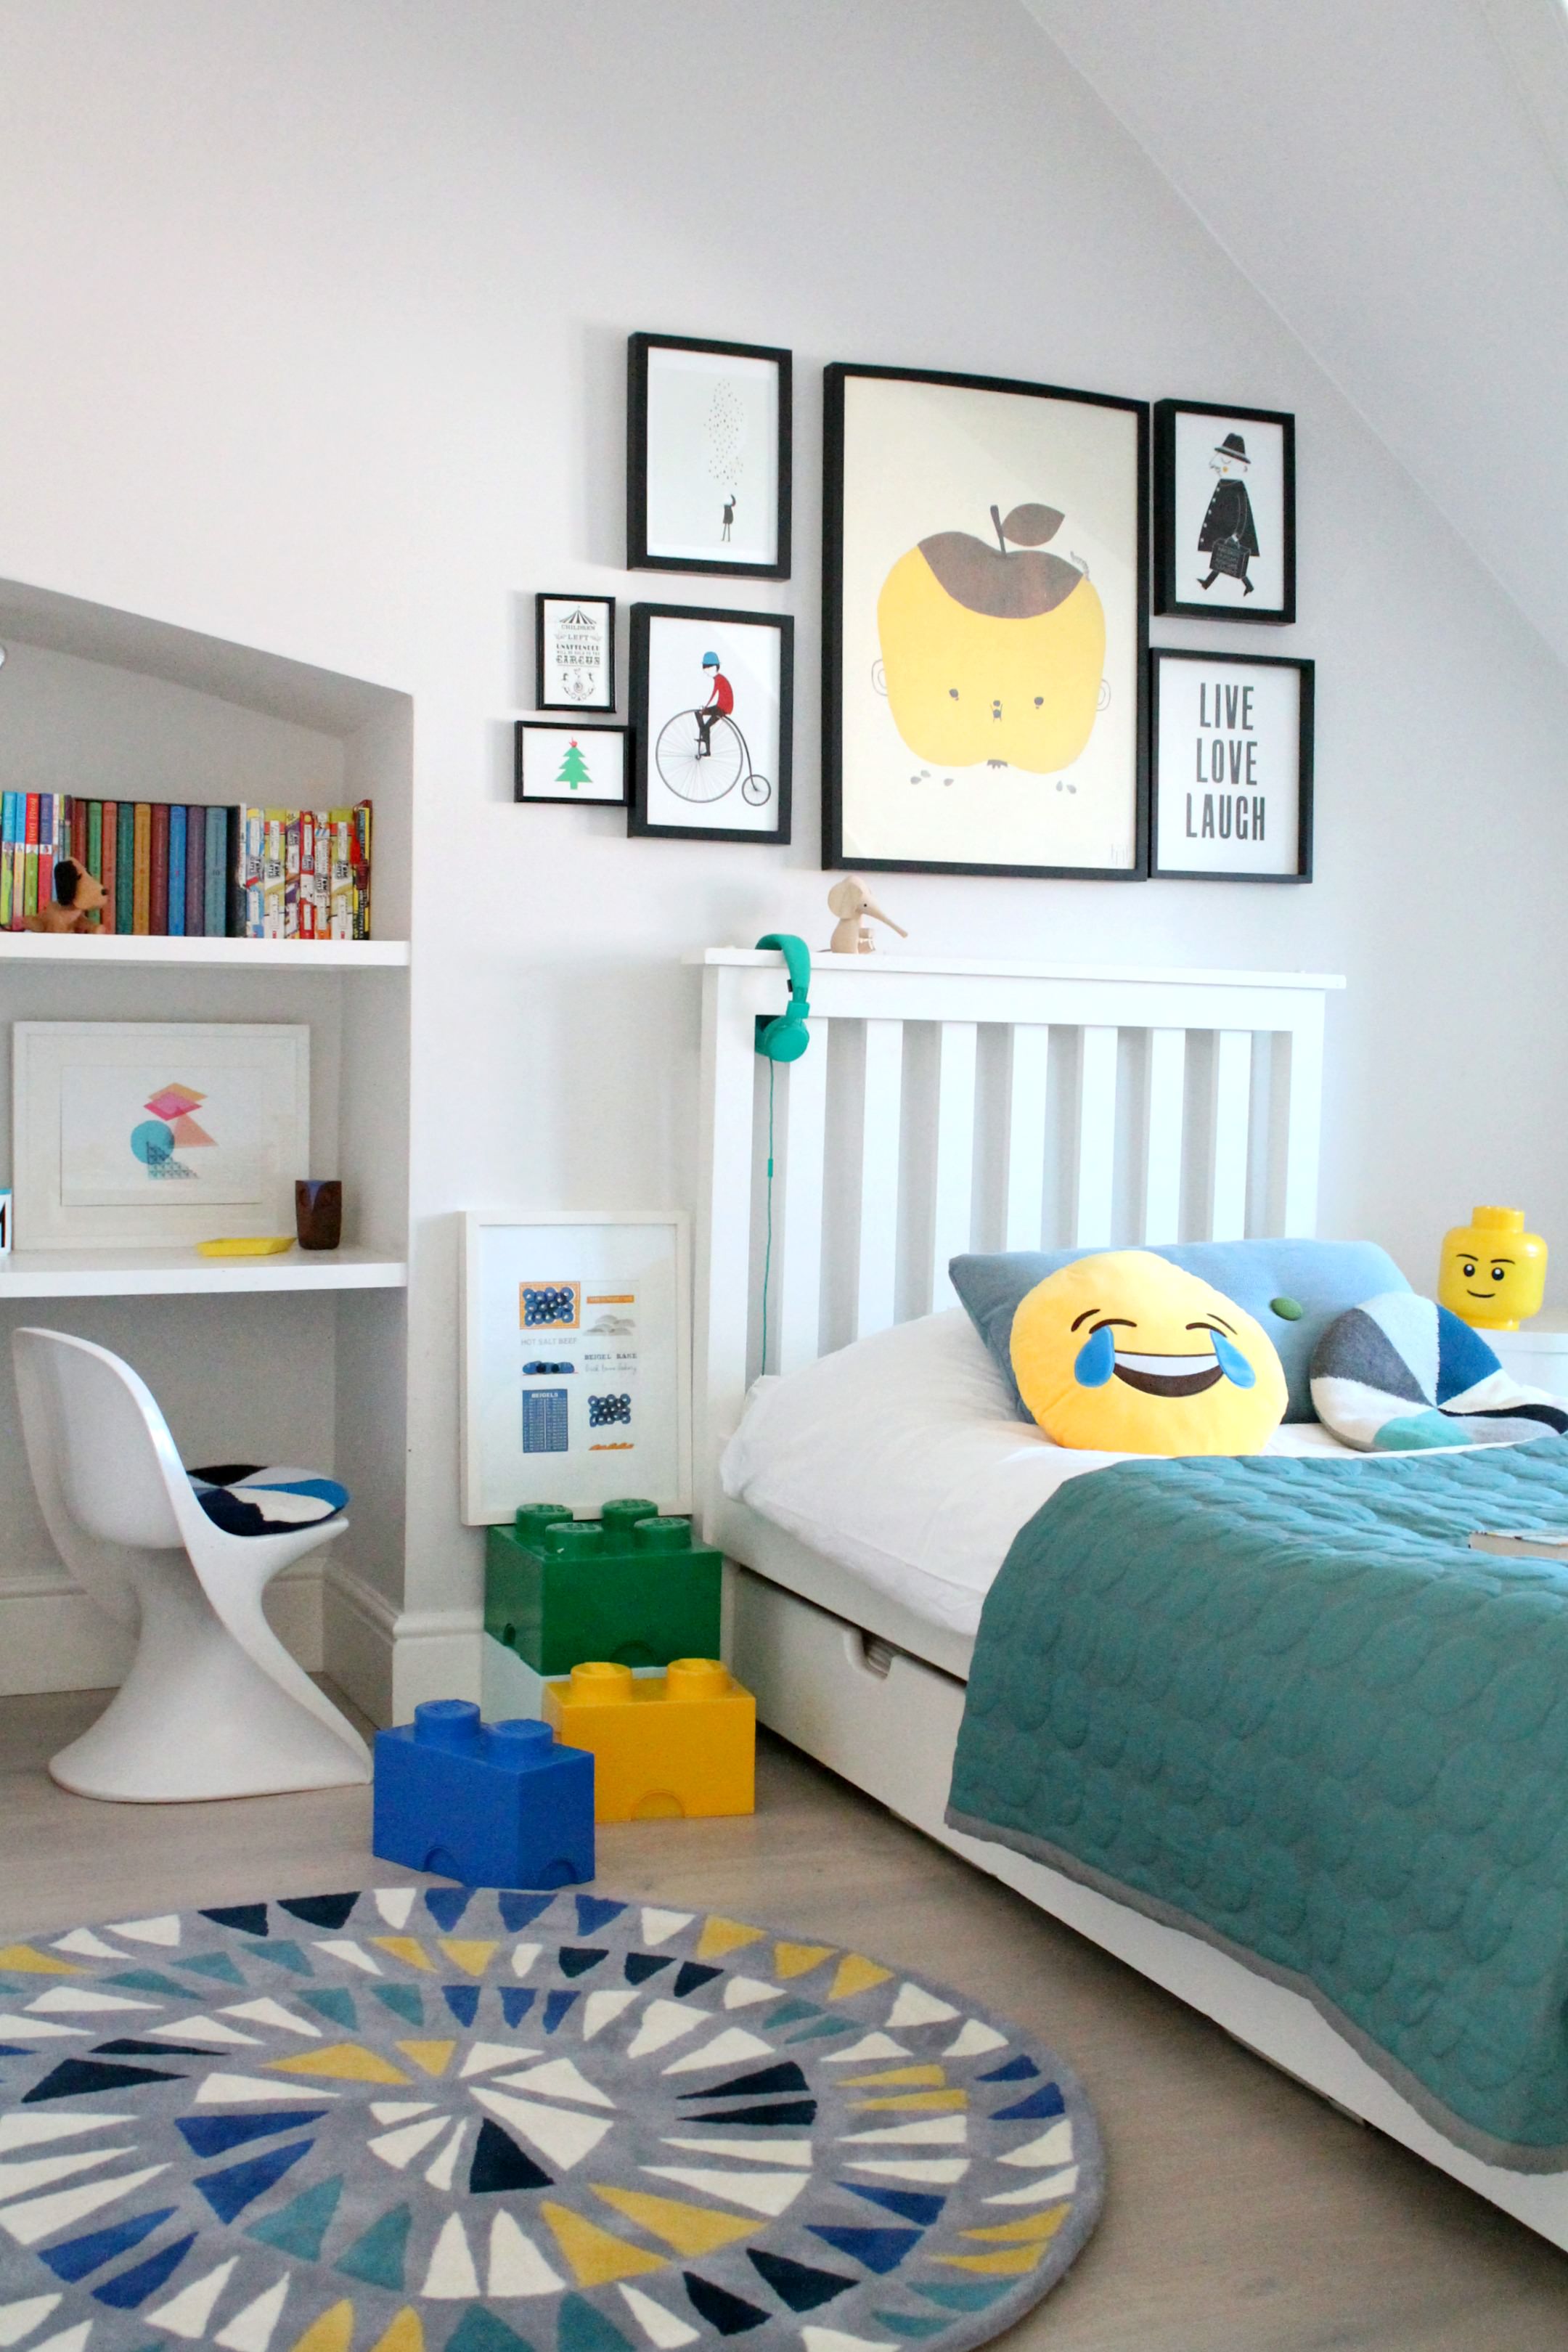 Bedroom-ideas-for-boys-photo-and-styling-by-Geraldine-Tan-Little-Big-Bell